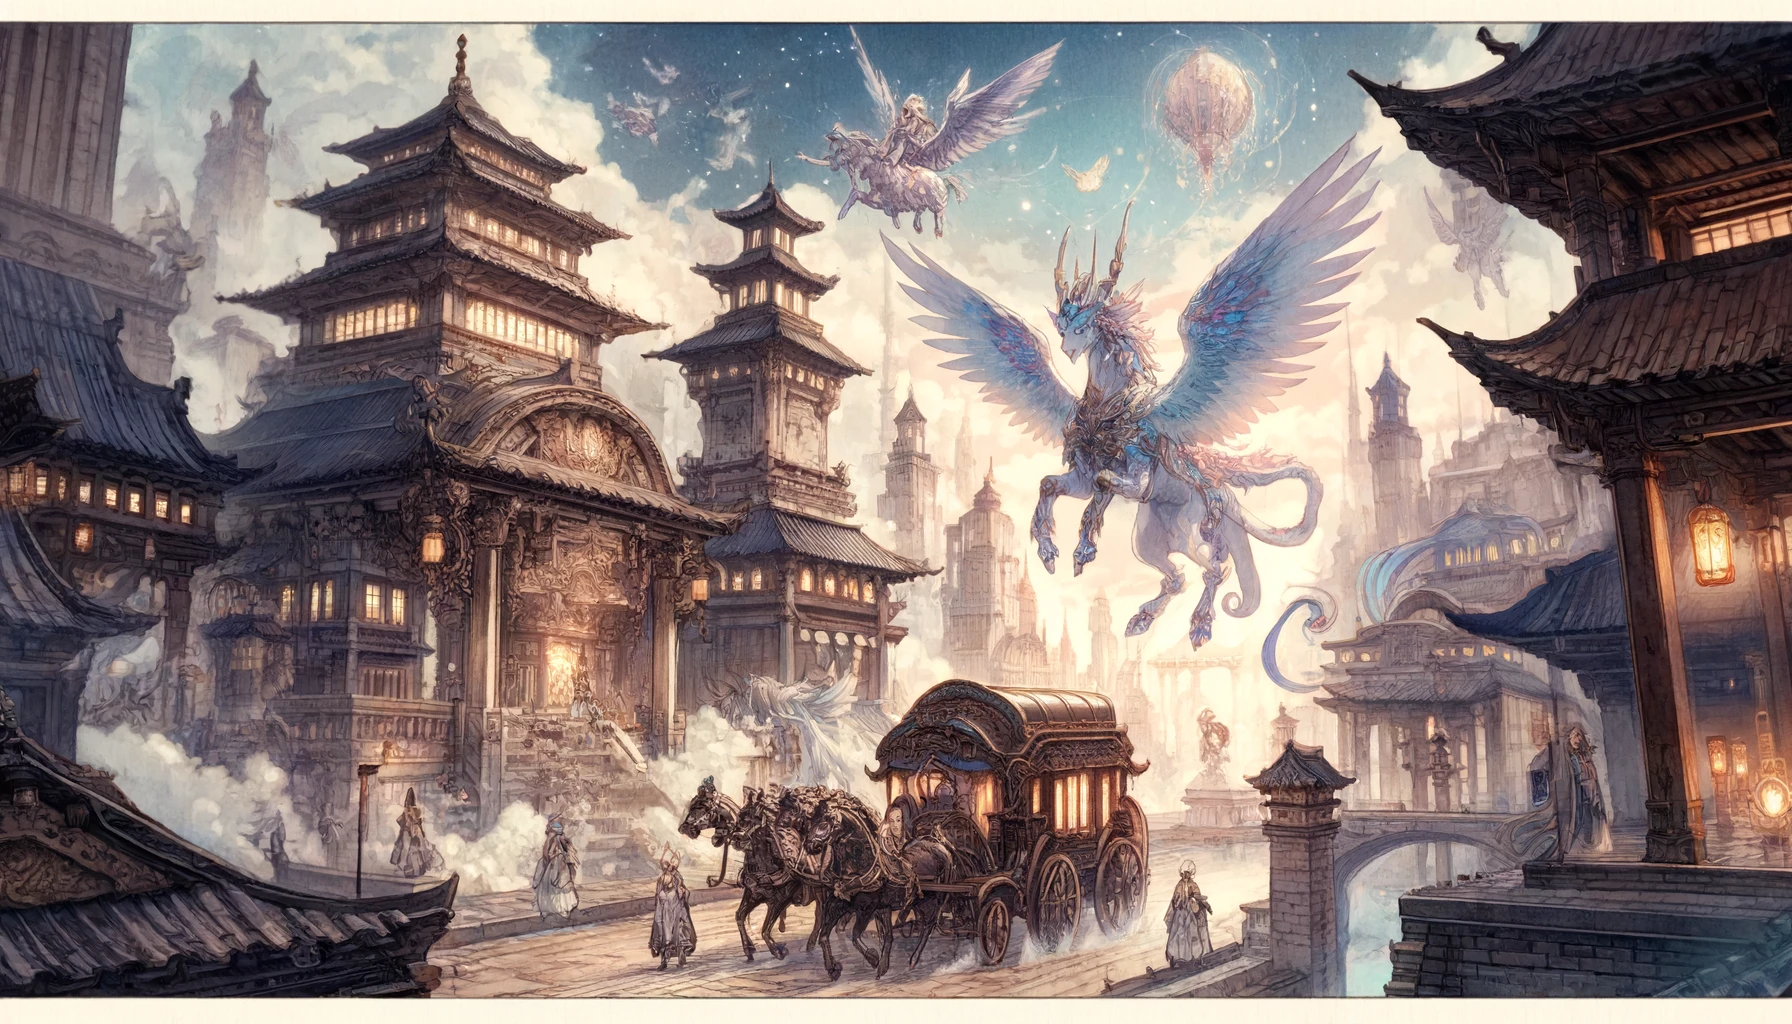 DALL-E-2024-05-04-00-26-18-A-wide-watercolor-style-anime-illustration-of-a-fantastical-ancient-Chine.webp